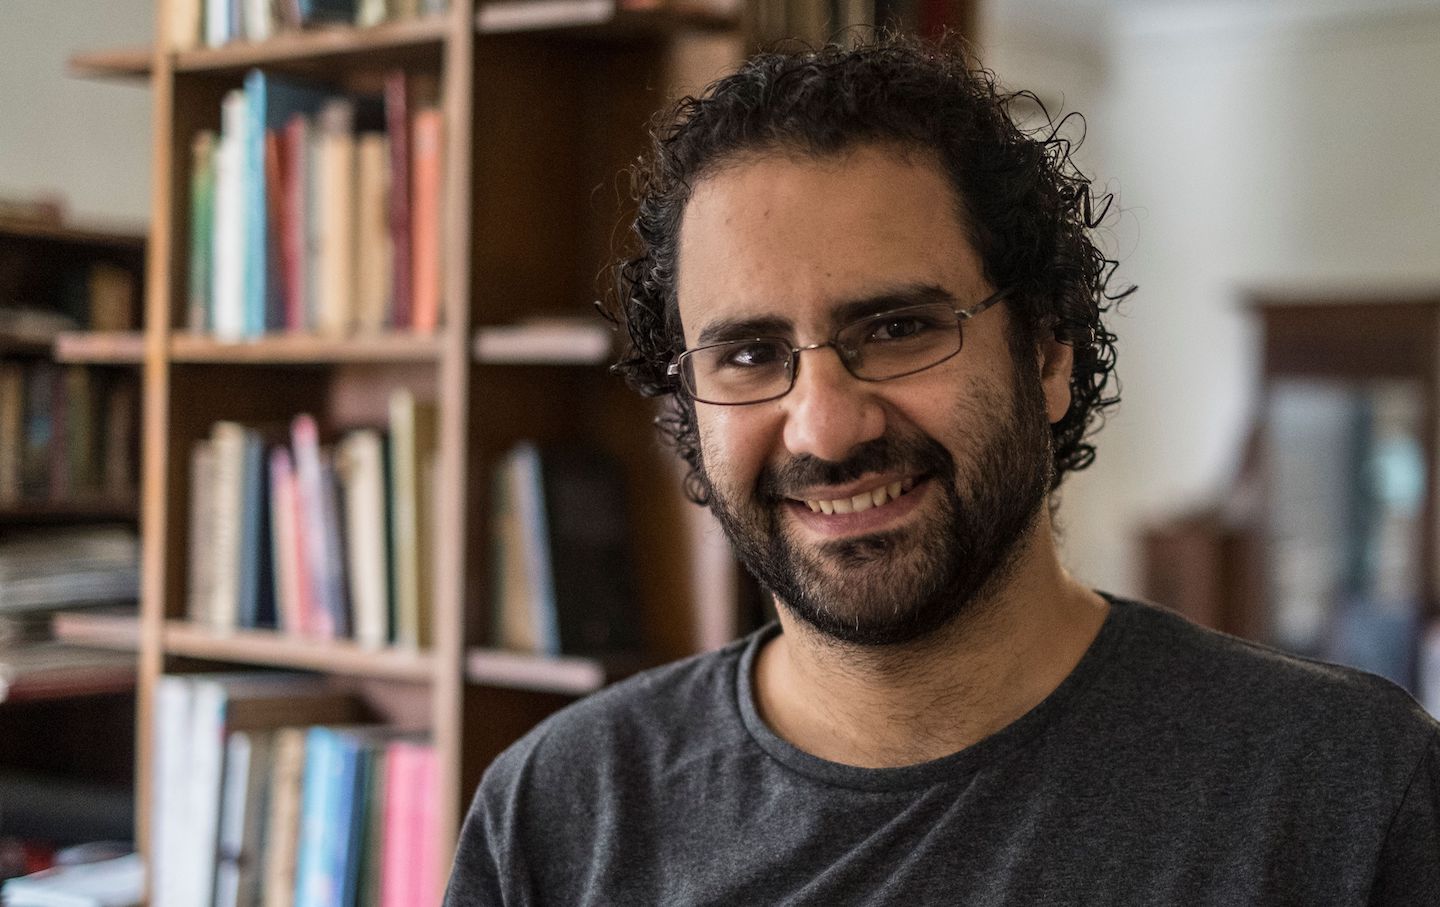 Alaa Abd el-Fattah and the Hope of a Generation